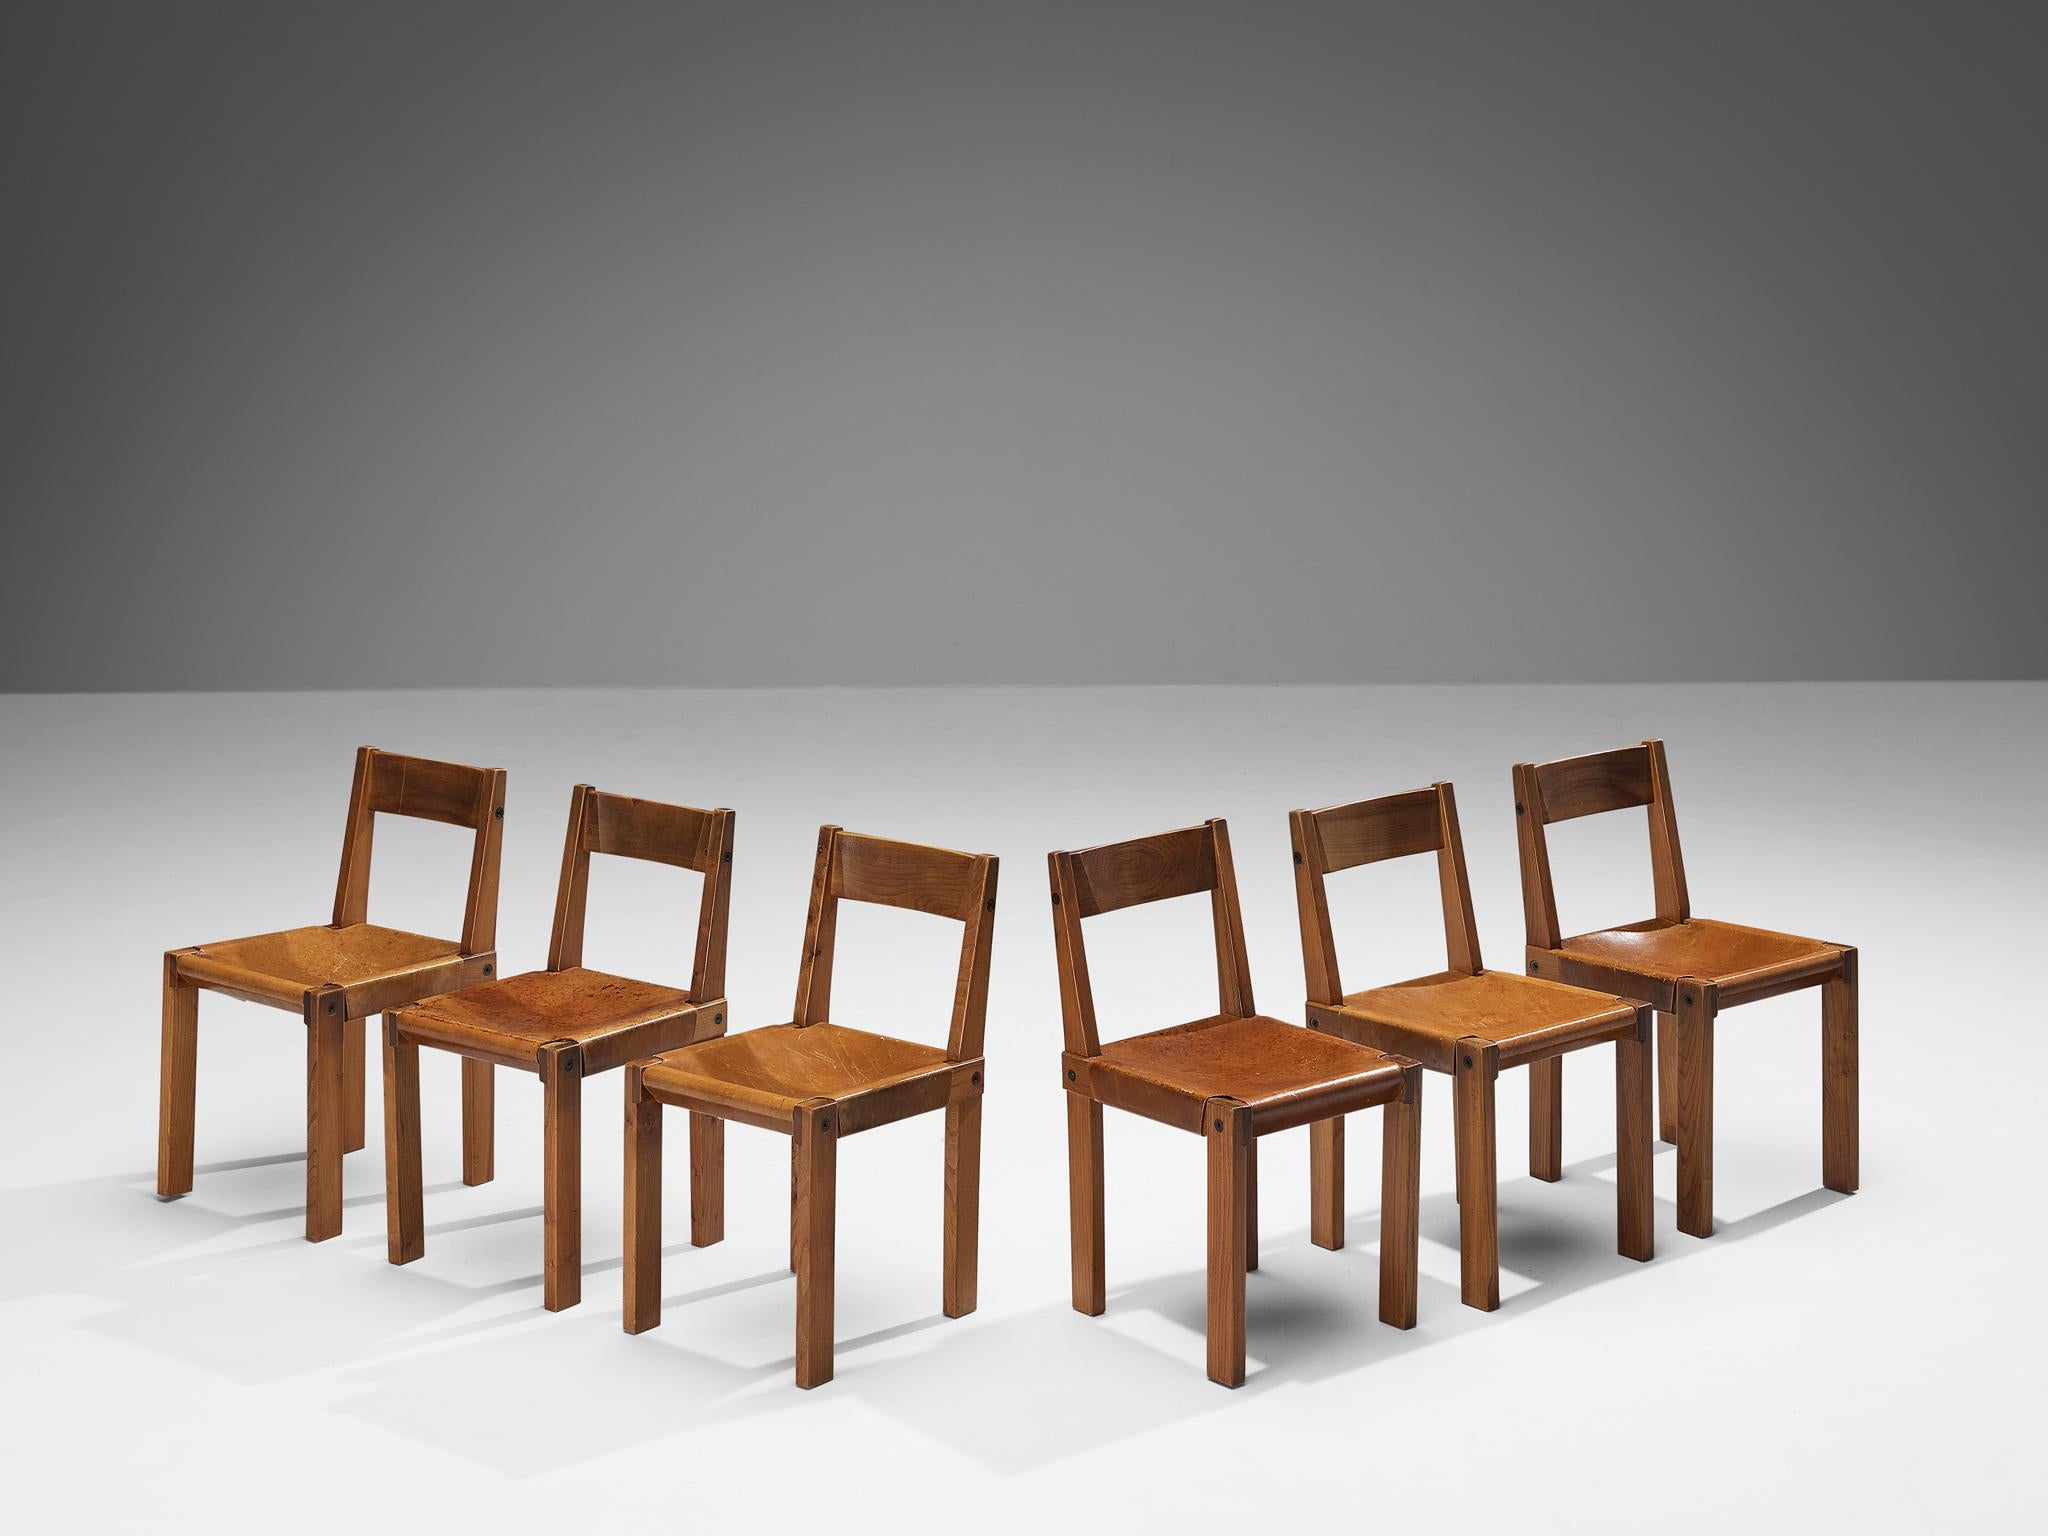 Pierre Chapo, set of six dining chairs, model 'S24', elm, leather, cord, France, 1967

These chairs are early editions designed by Pierre Chapo, known for his hallmark use of solid elmwood and a commitment to pure and clean design and construction